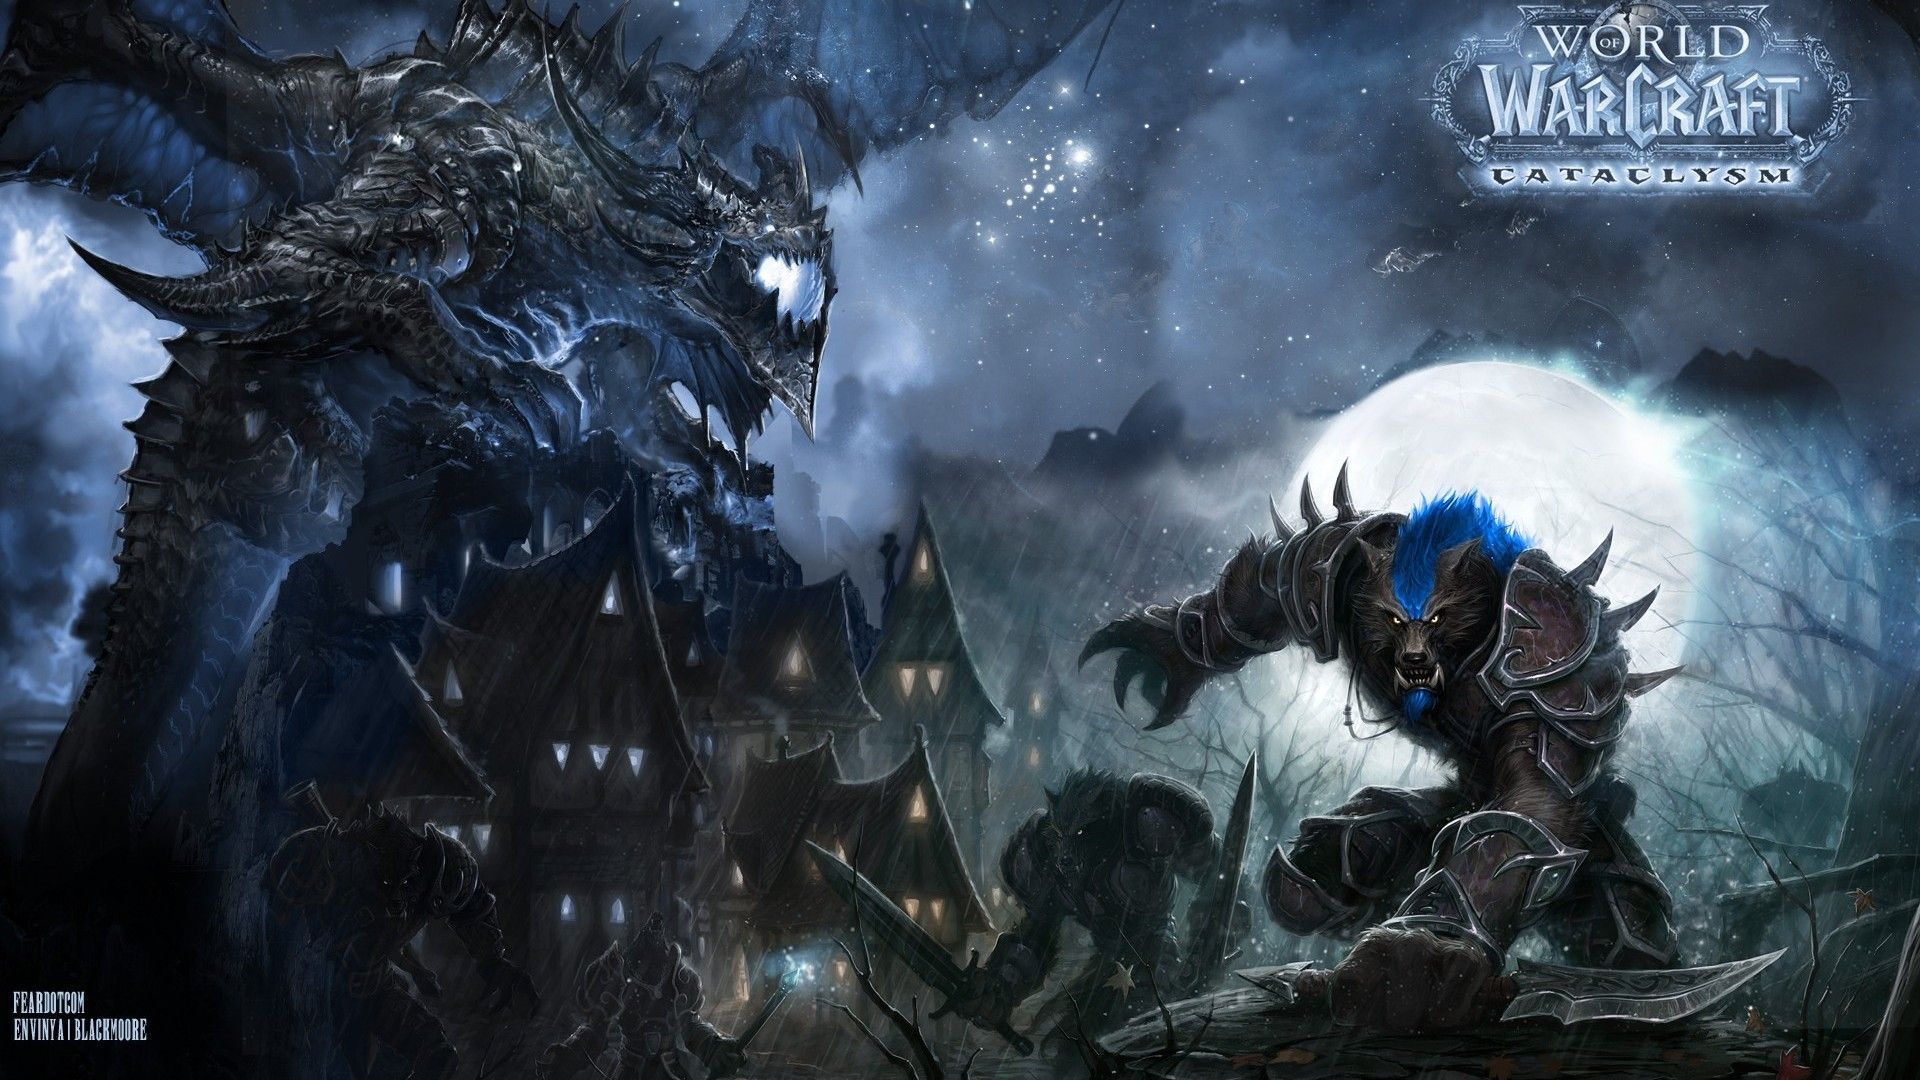 Free download World of Warcraft Game Exclusive HD Wallpaper 2156